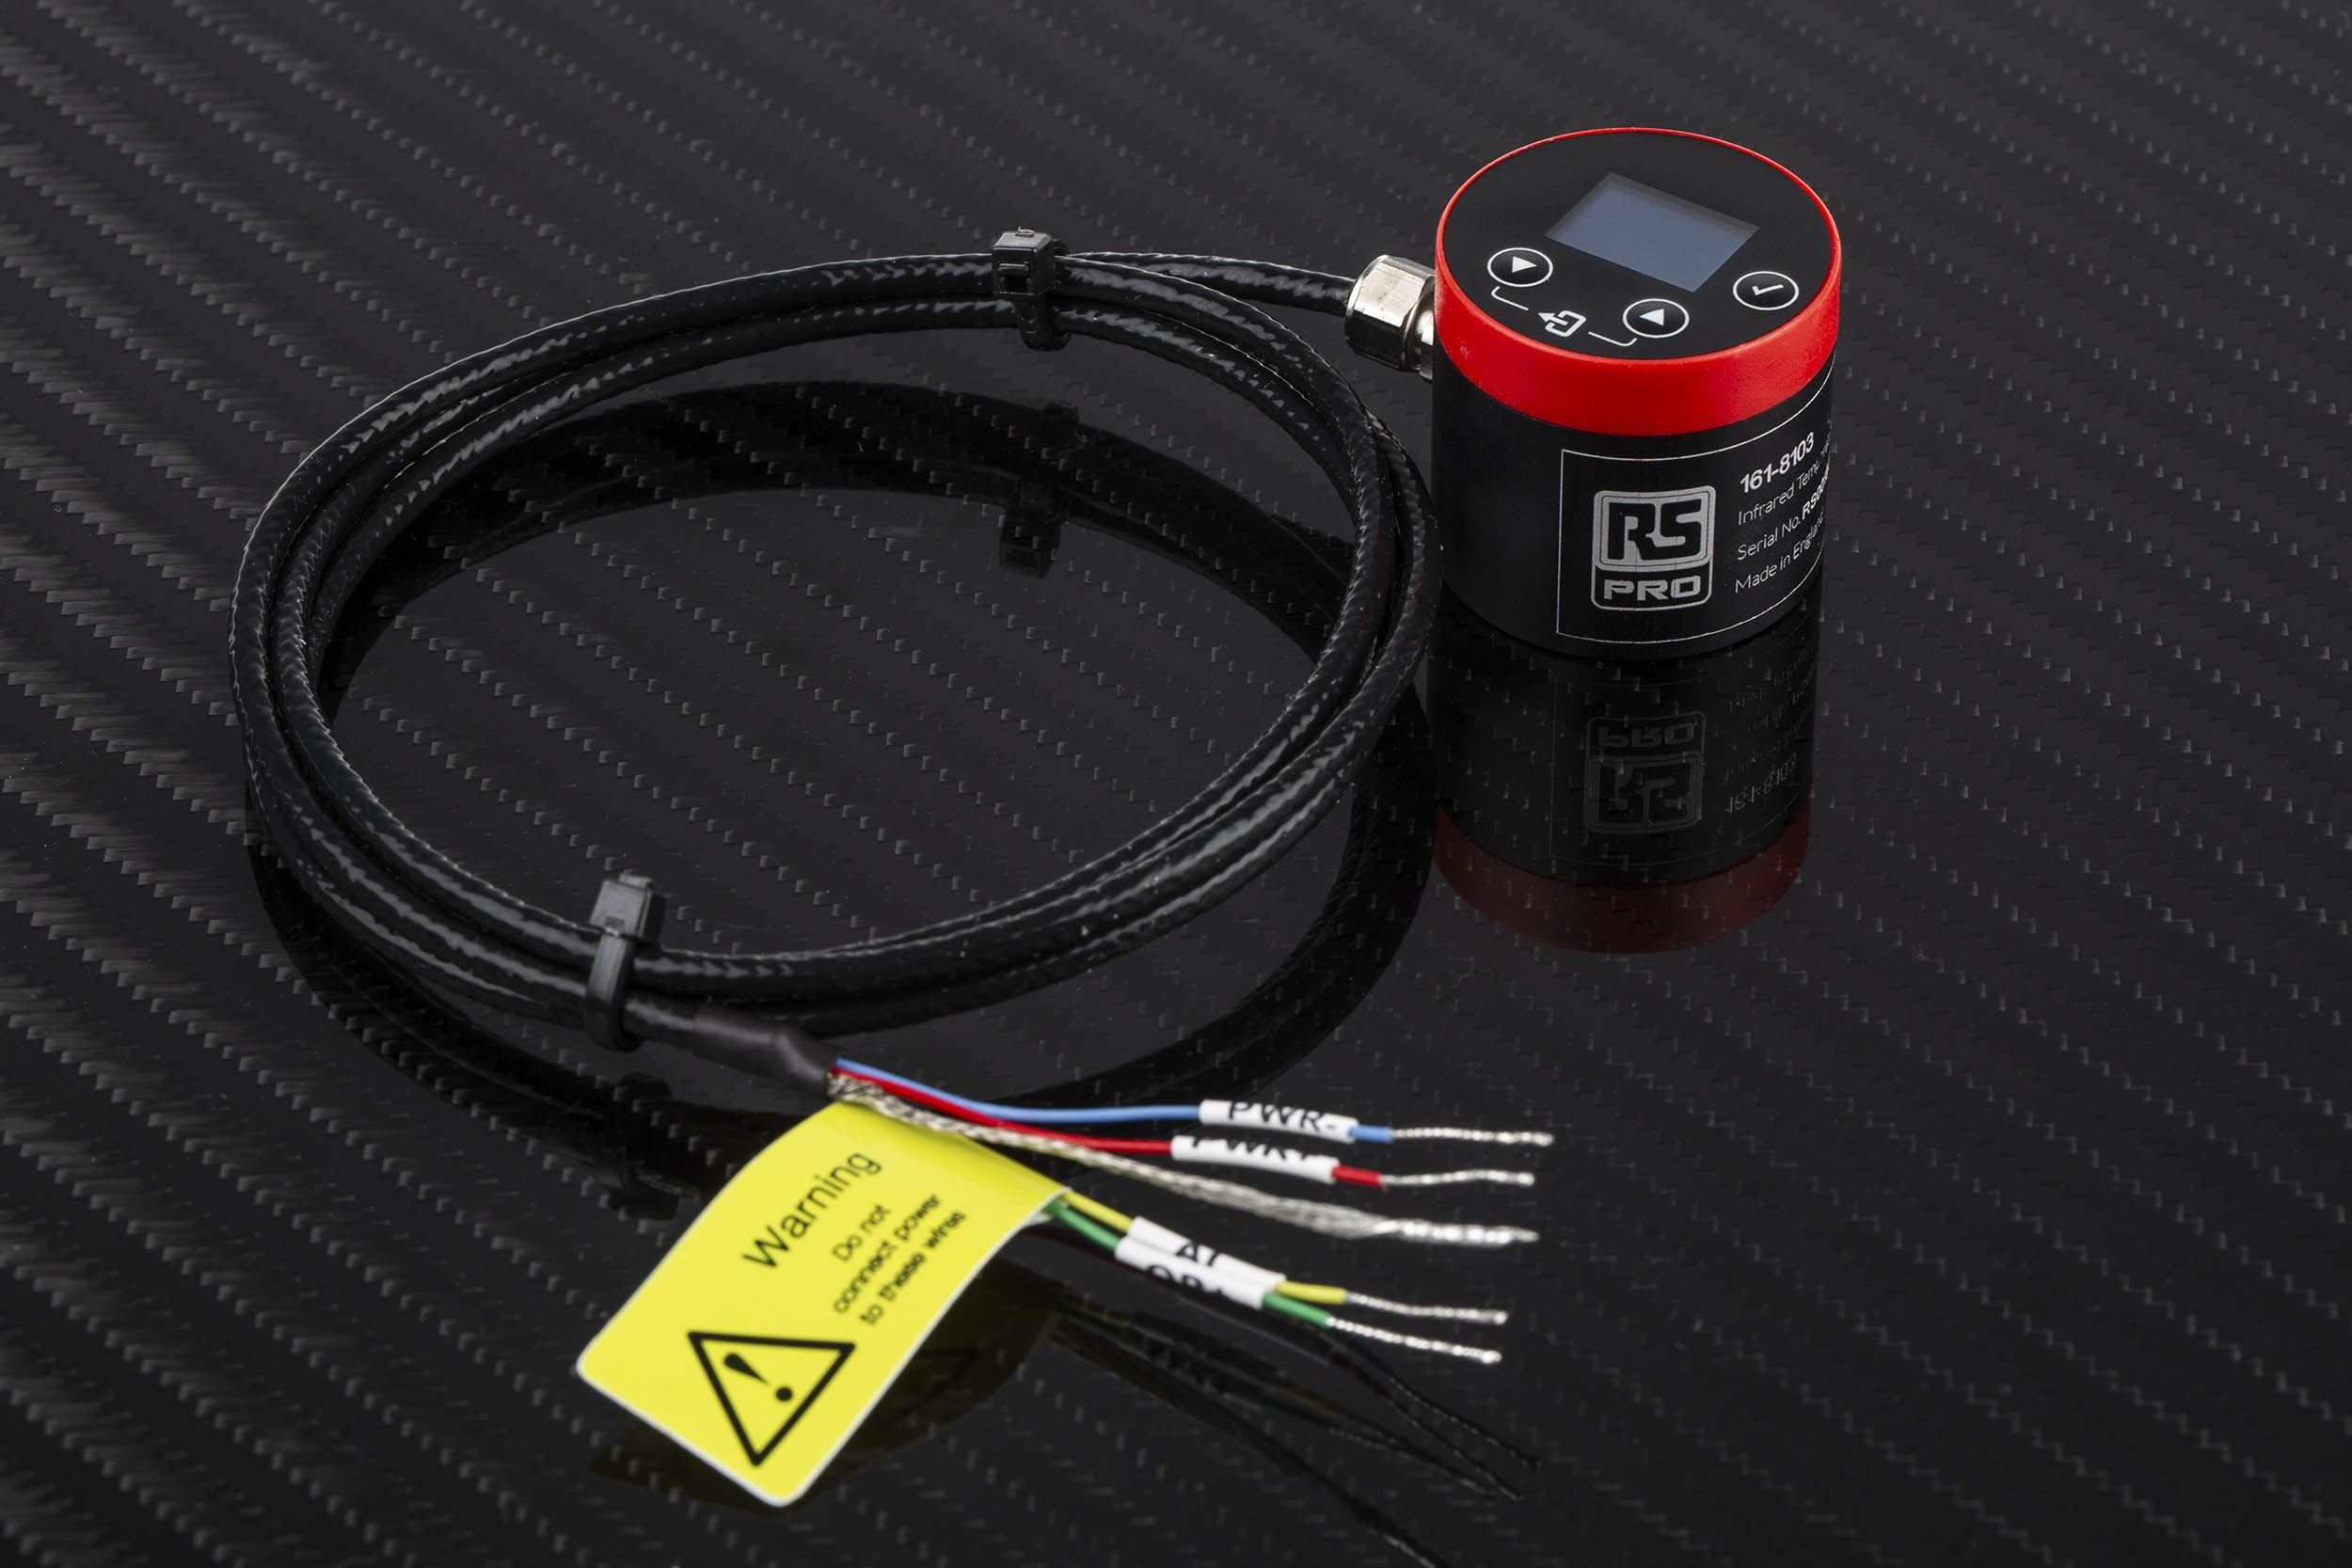 RS PRO V Output Signal Infrared Temperature Sensor, 1m Cable, 0°C to +1000°C